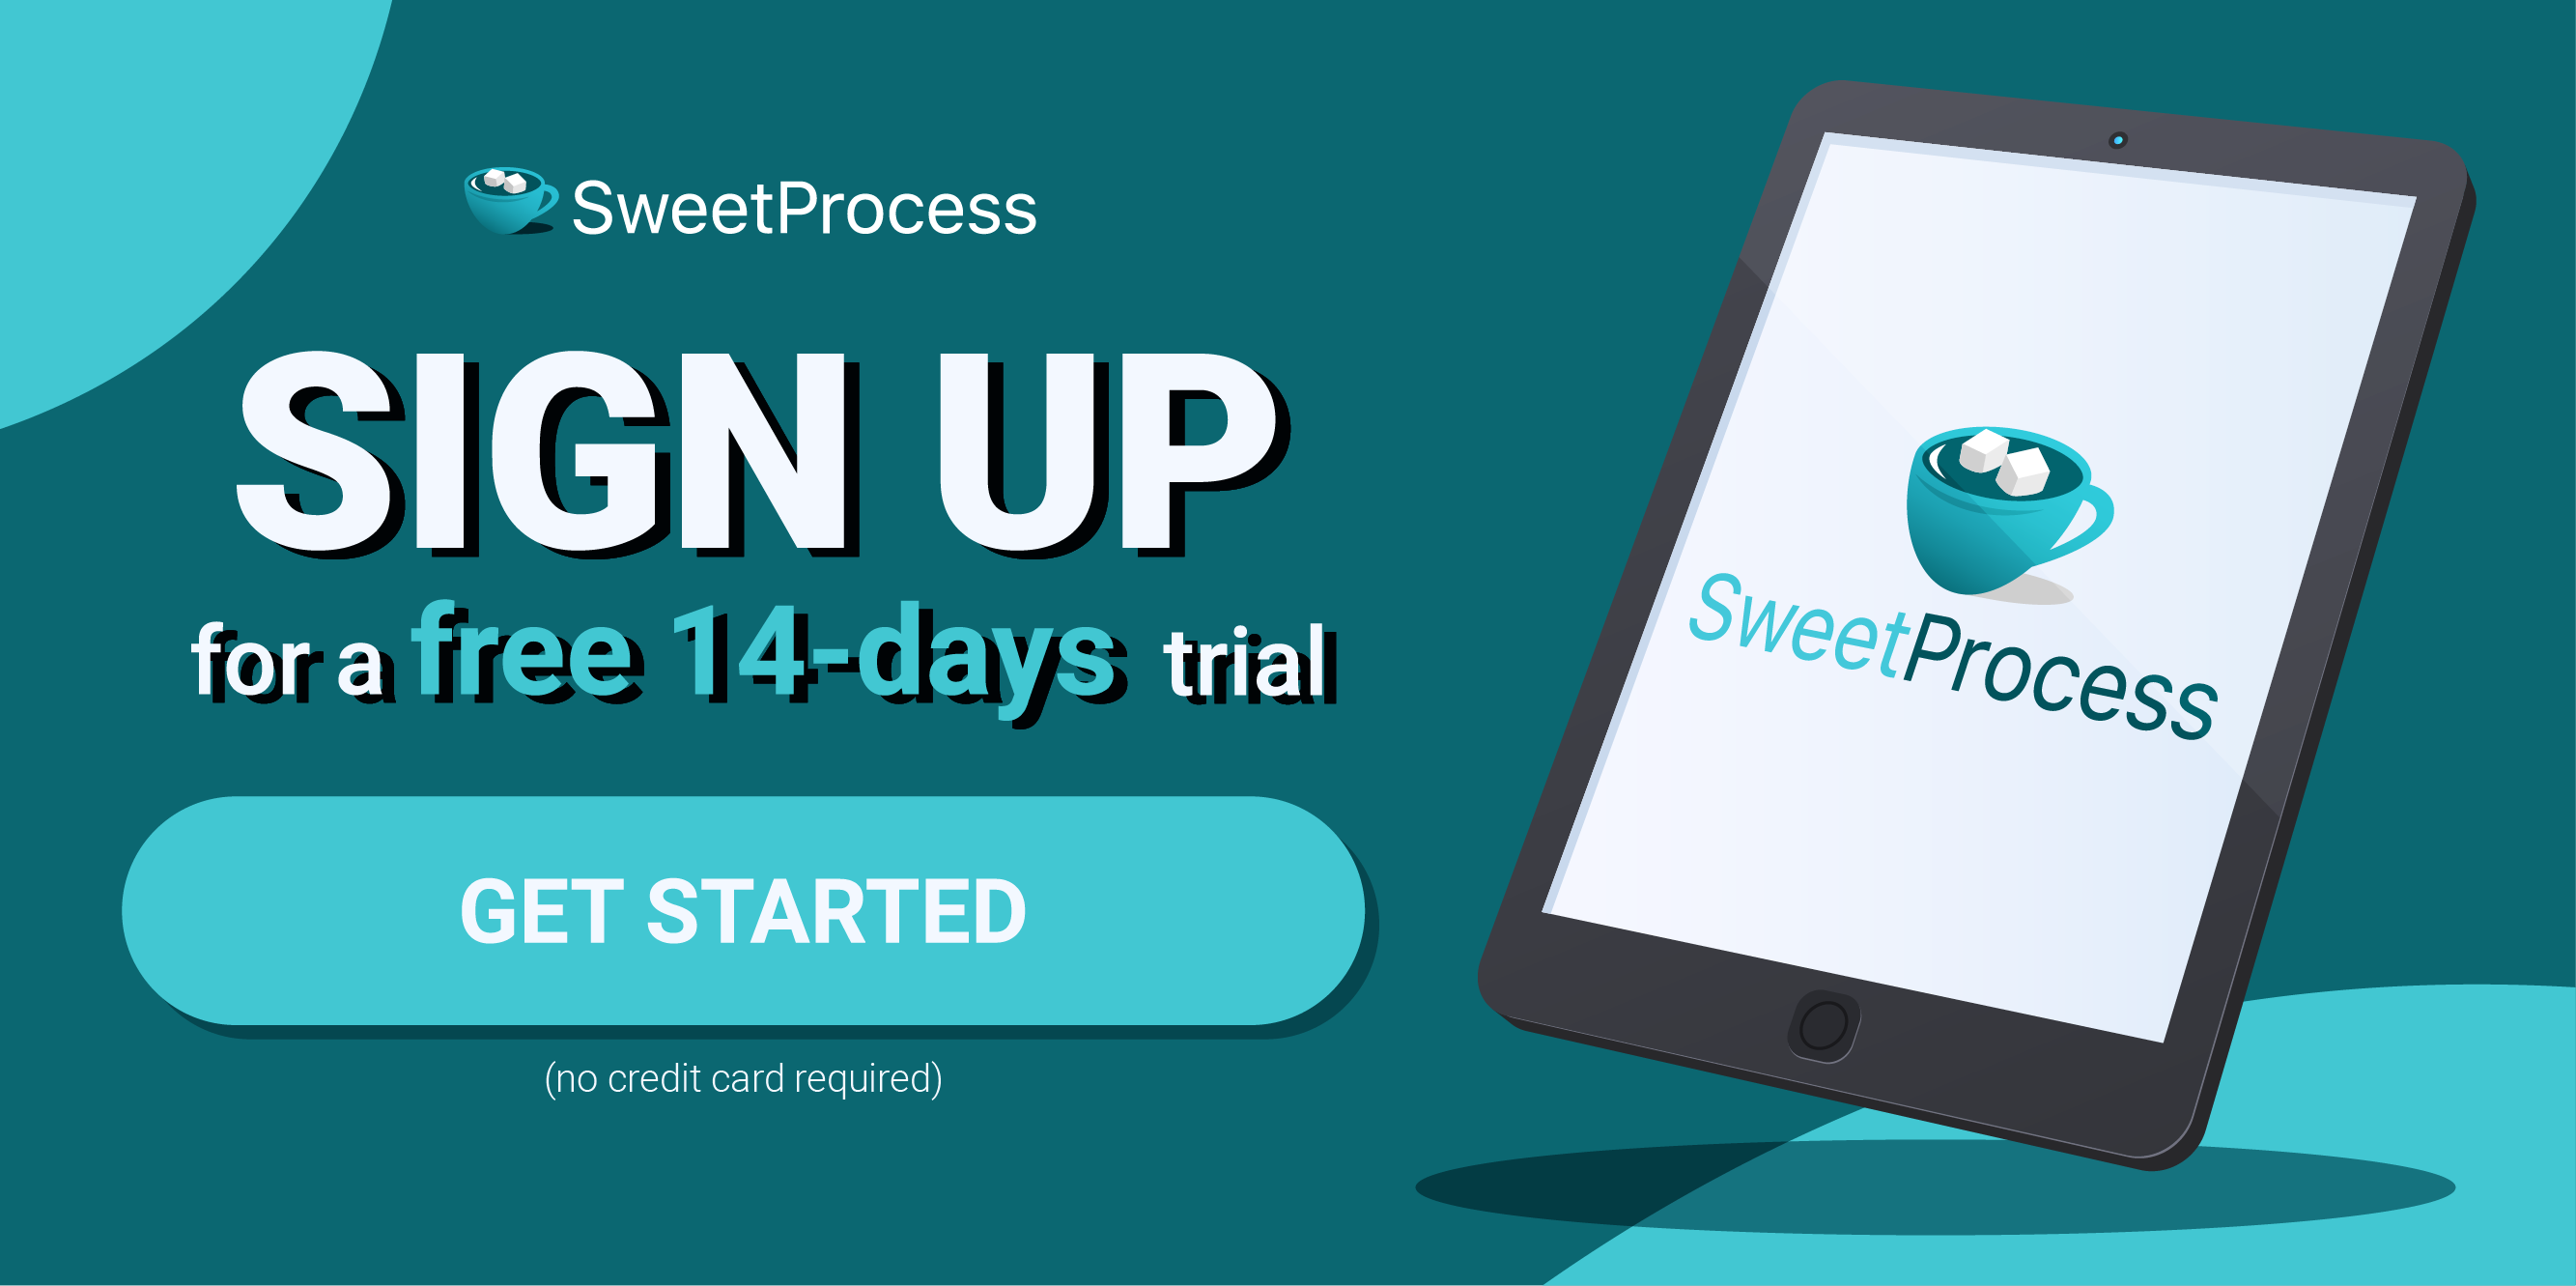 Sign up for a free 14-days trial